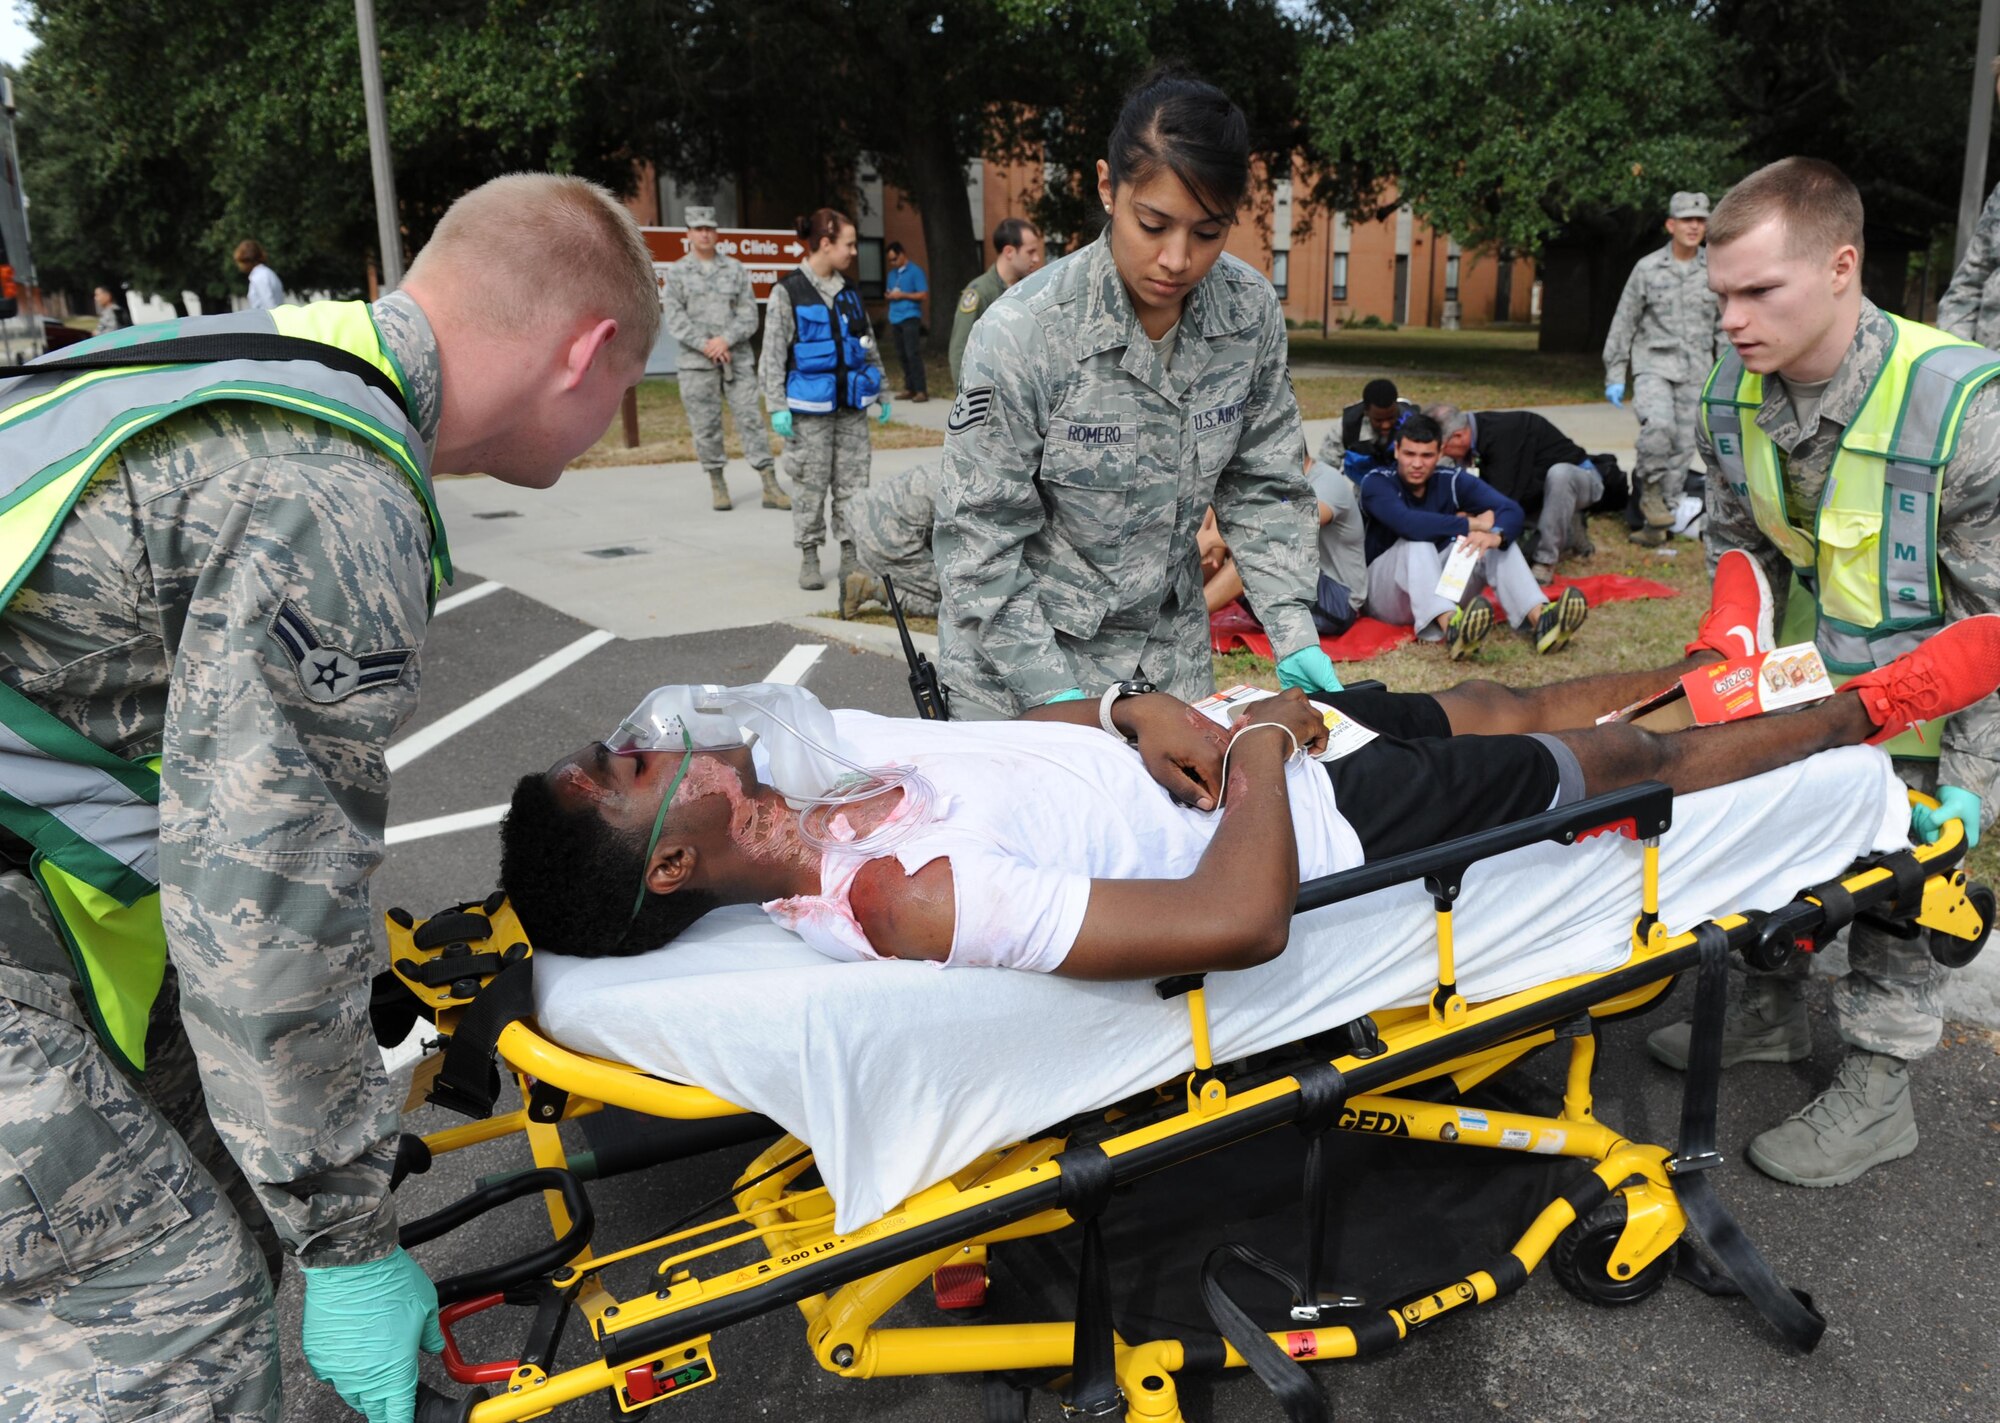 Personnel with the 81st Medical Group prepare a simulated victim to transport to the Keesler Medical Center’s emergency room during a chemical, biological, radiological and nuclear exercise scenario, Oct. 22, 2015, on Keesler Air Force Base, Miss. The Force Protection Condition exercise scenario included an intruder simulating releasing gas to cause a mass casualty event. Keesler’s emergency room, which is open 24/7, sees around 2,000 patients monthly and is one of several clinics in the medical center. (U.S. Air Force photo by Kemberly Groue/Released)